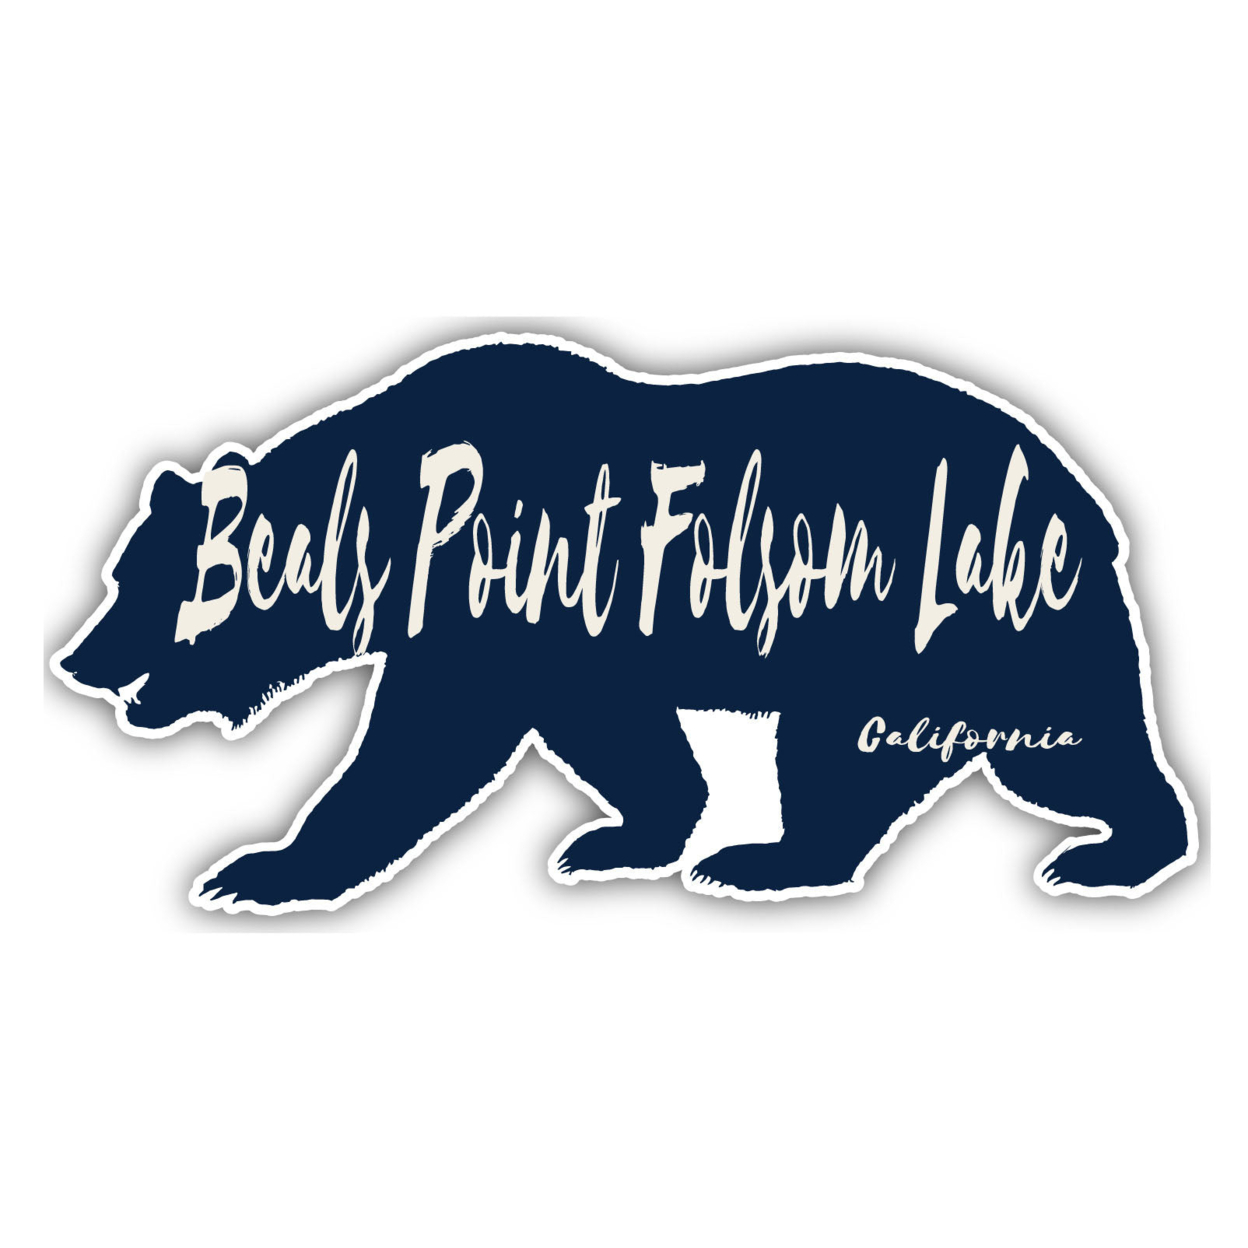 Beals Point Folsom Lake California Souvenir Decorative Stickers (Choose Theme And Size) - 4-Pack, 4-Inch, Camp Life